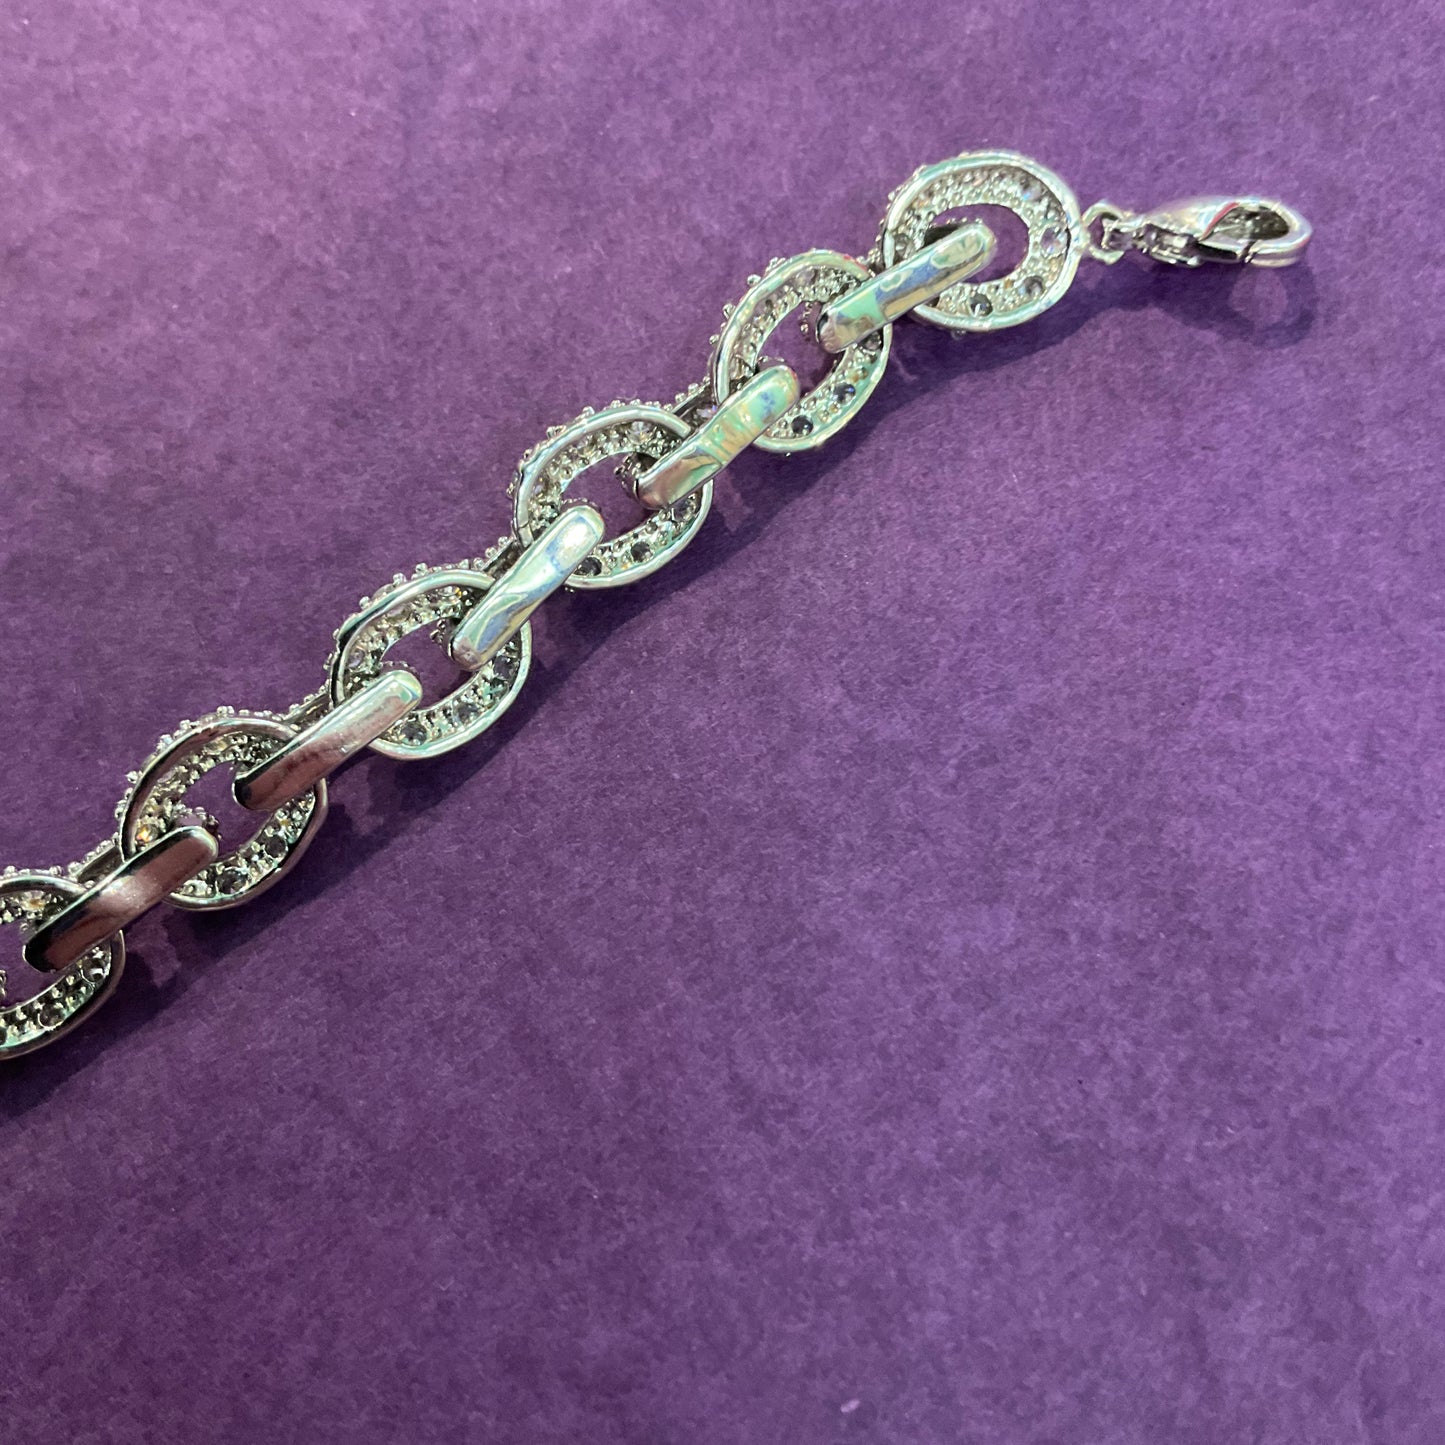 Vintage Butler and Wilson silver rhinestone crystal chain link bracelet, signed, as new, wedding, gift for her.